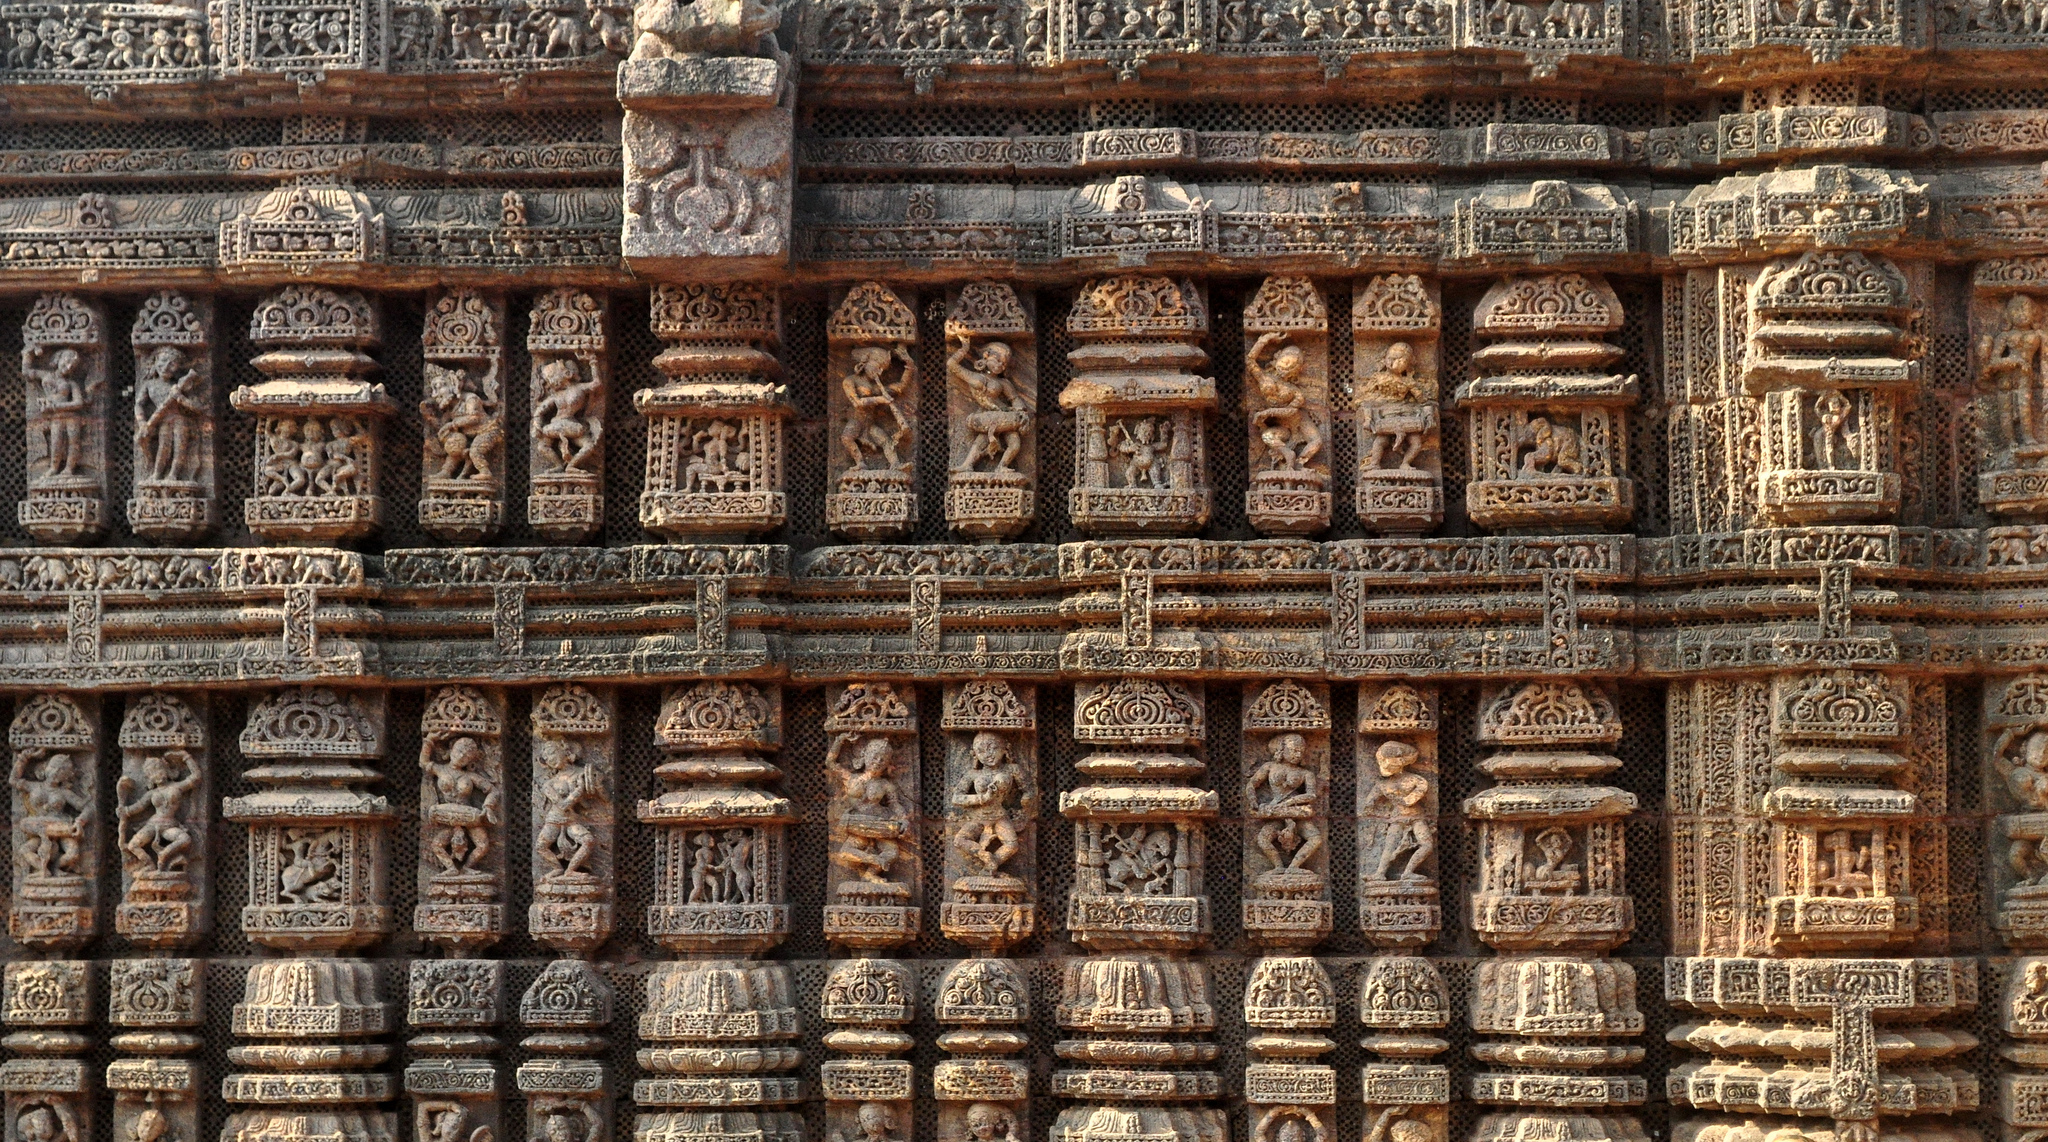 Wall of the multipurpose temple